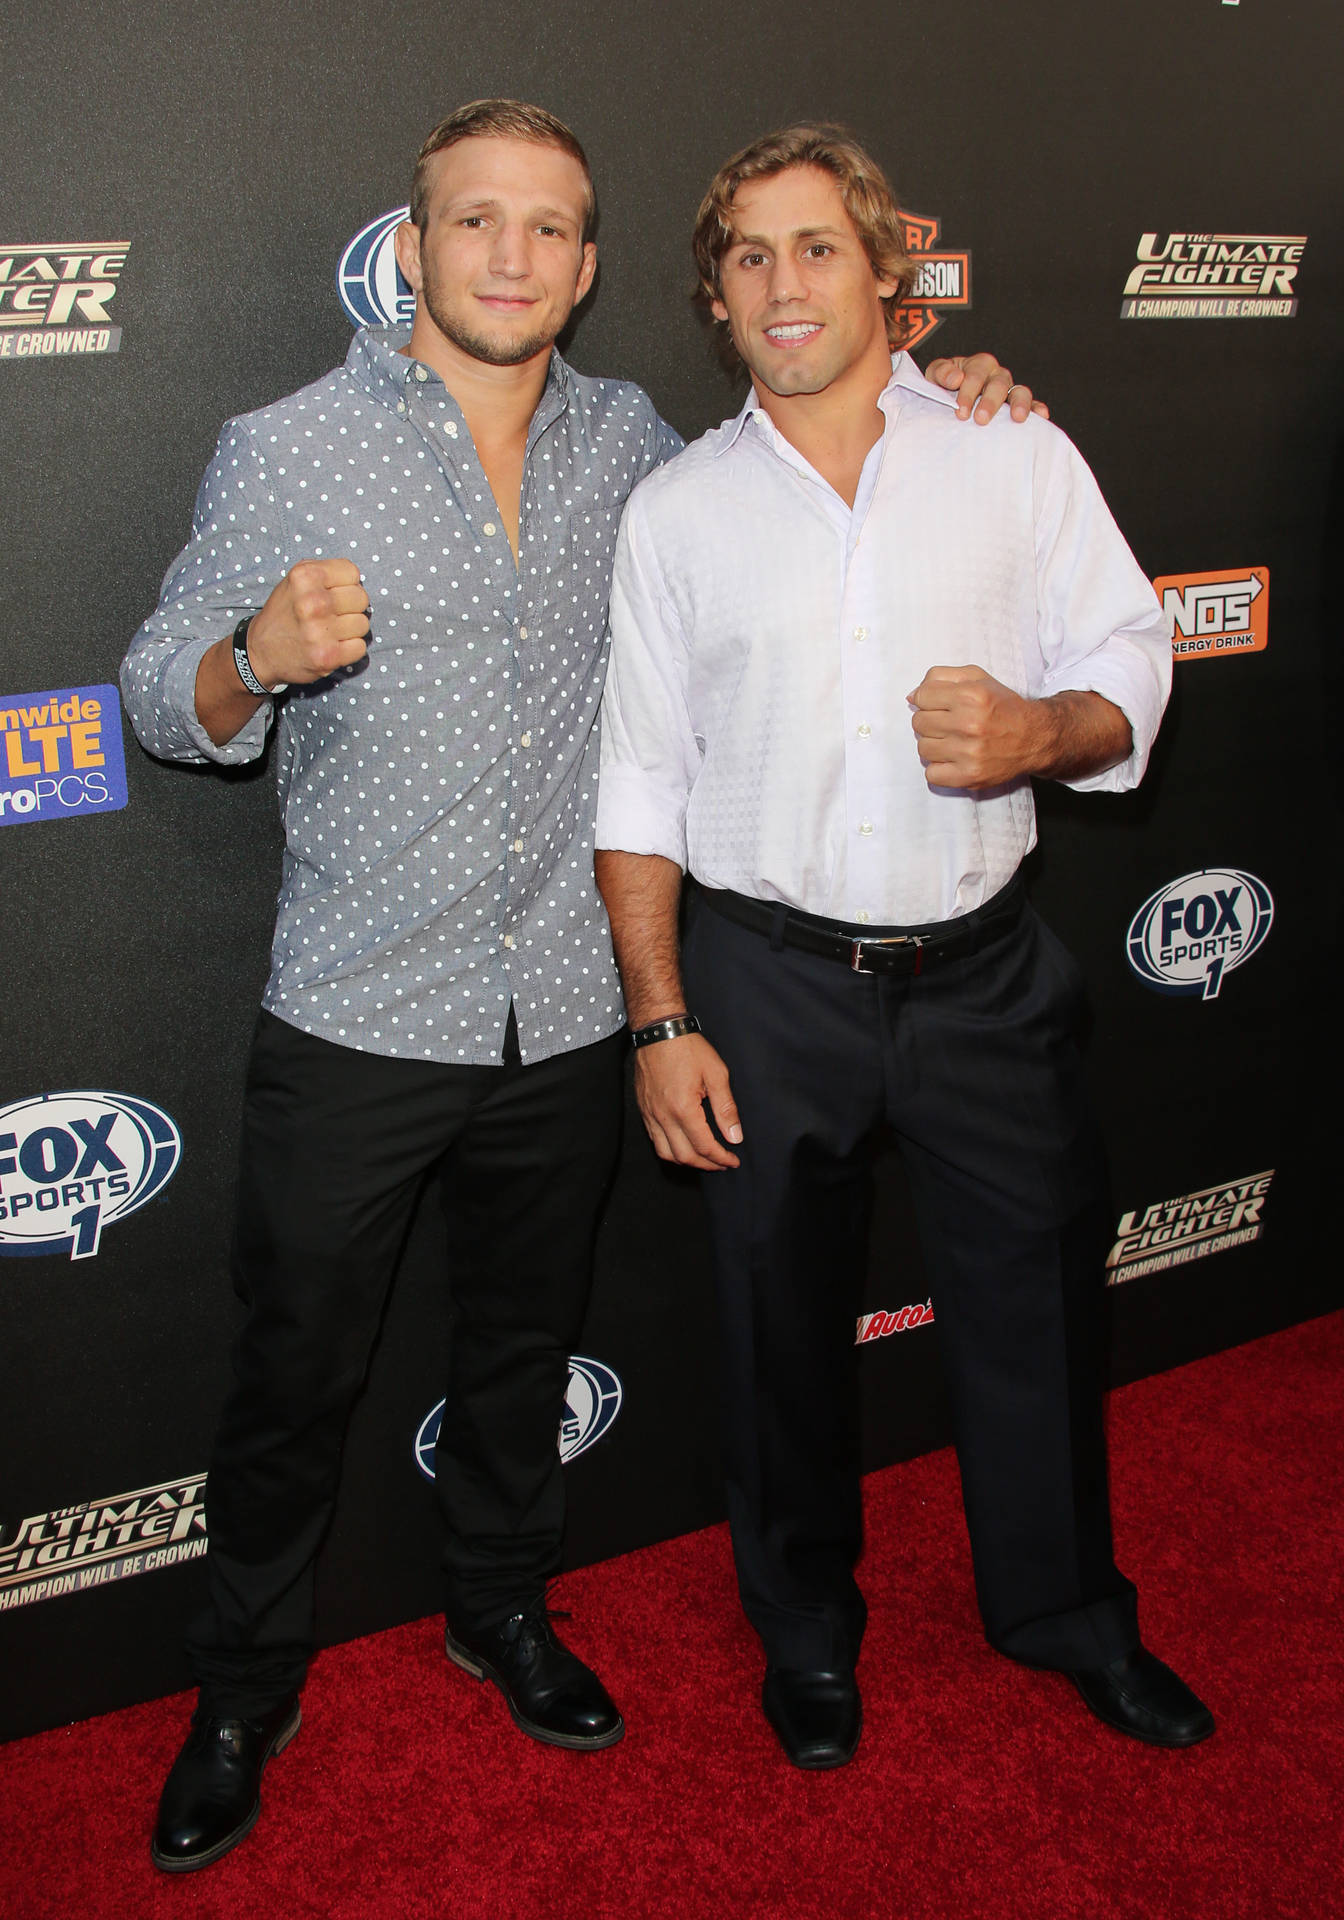 Urijah Faber and TJ Dillashaw during a mixed martial arts event. Wallpaper